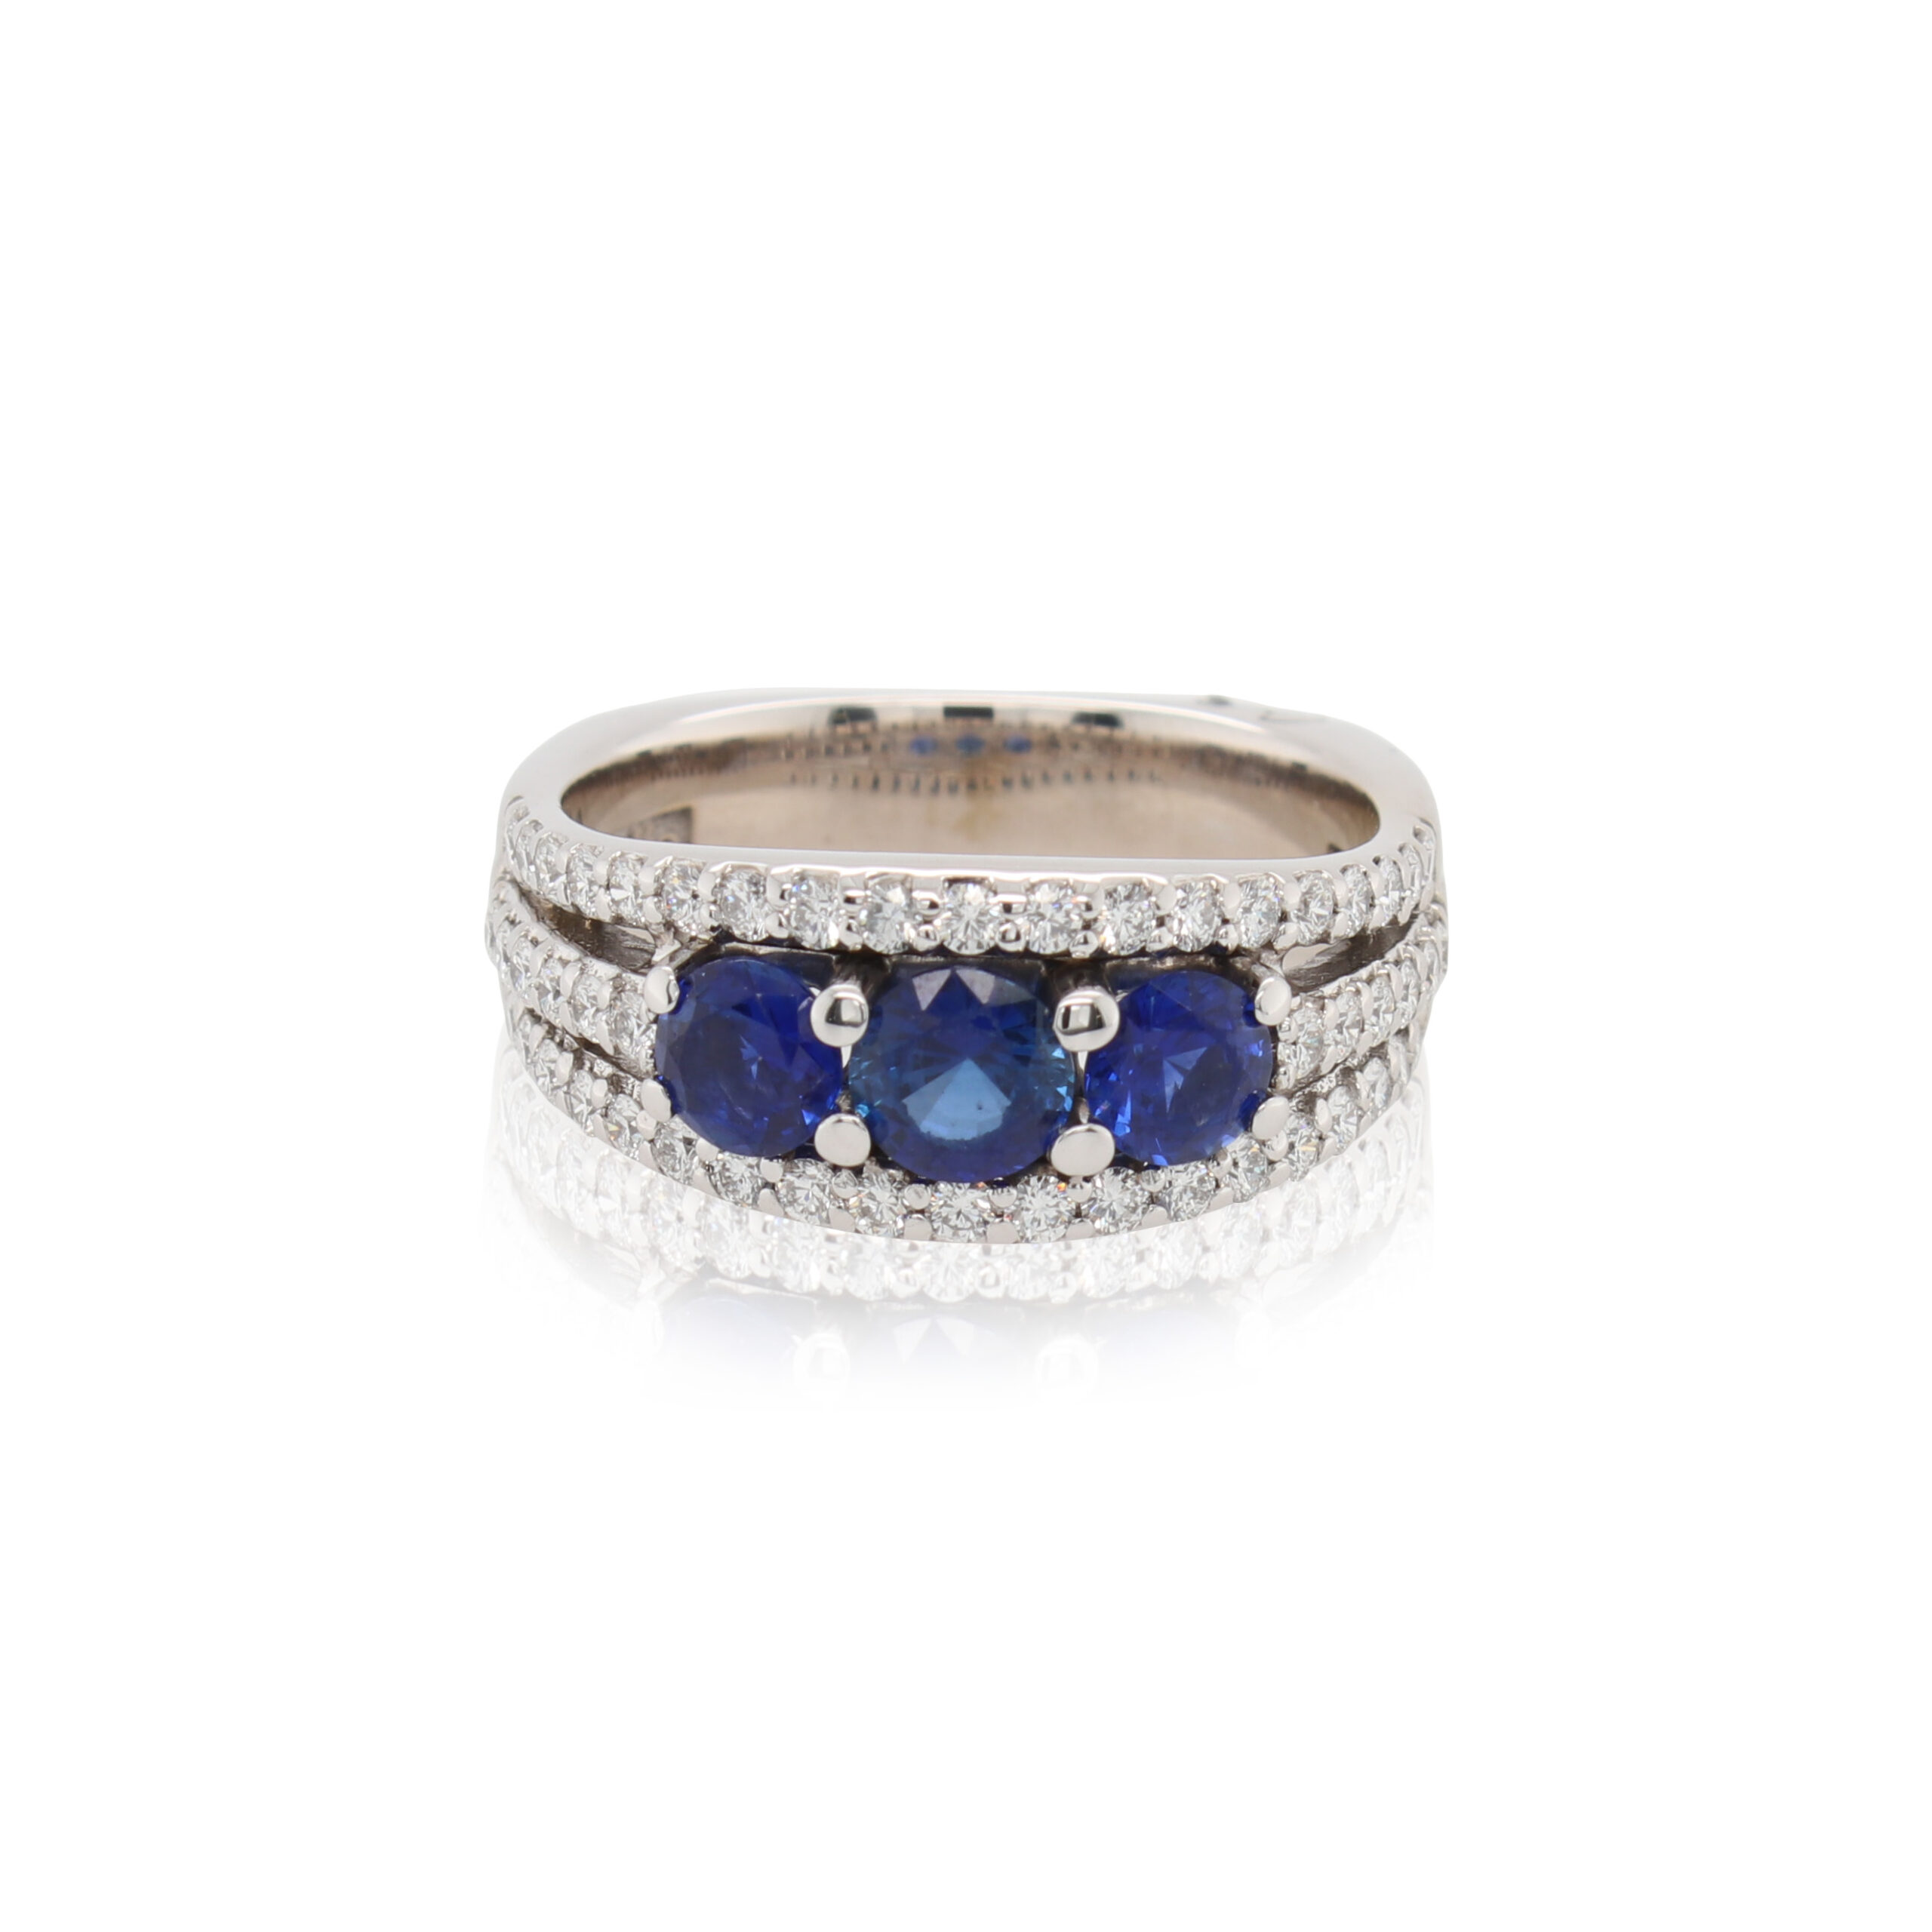 This ring is crafted from 18k white gold and features 3 sapphires that total to 1.15 carats and 0.50 total carats of diamonds.